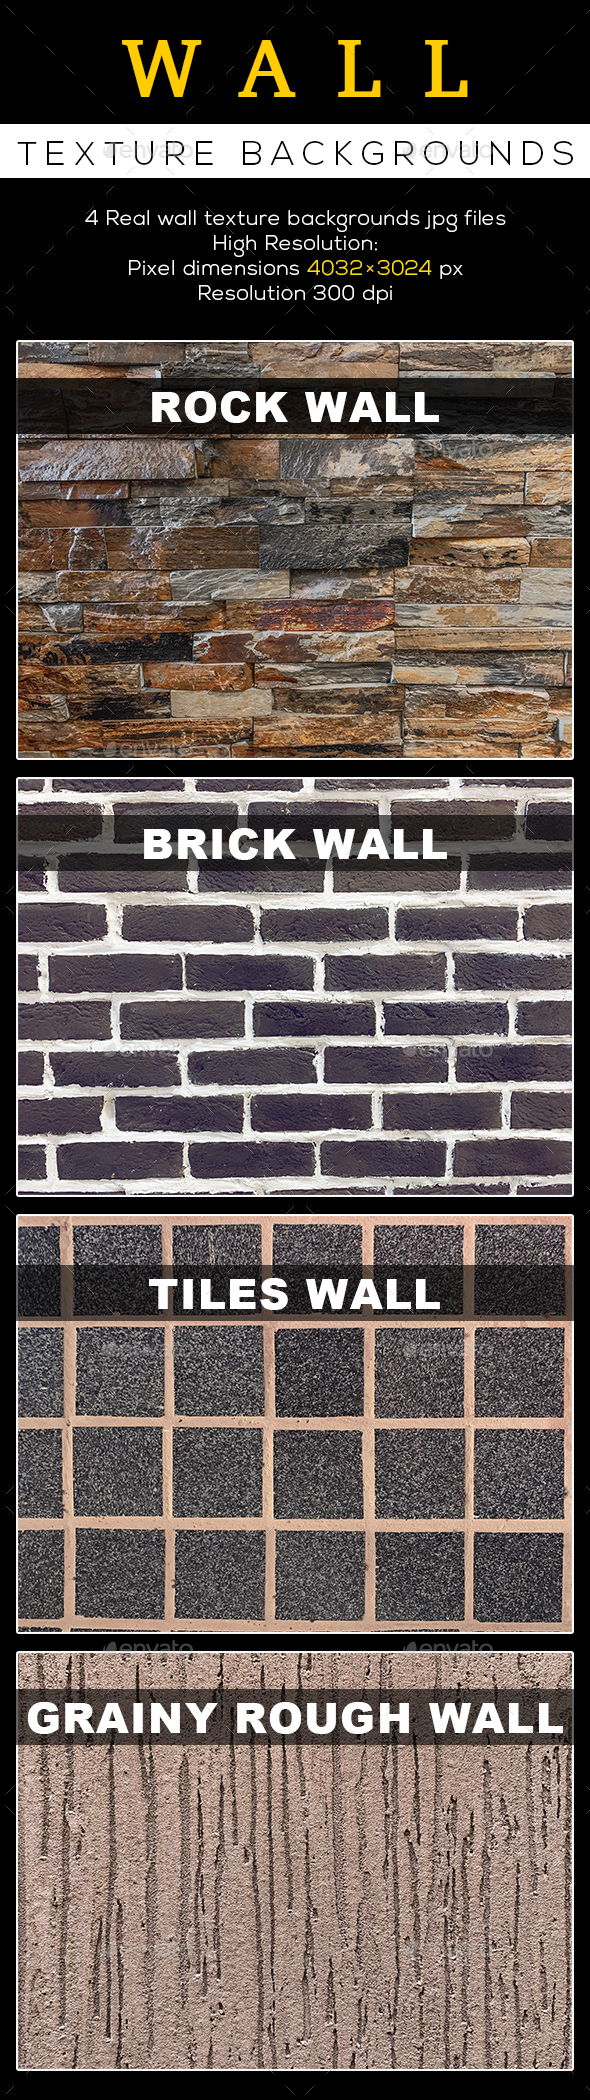 4 Wall texture backgrounds